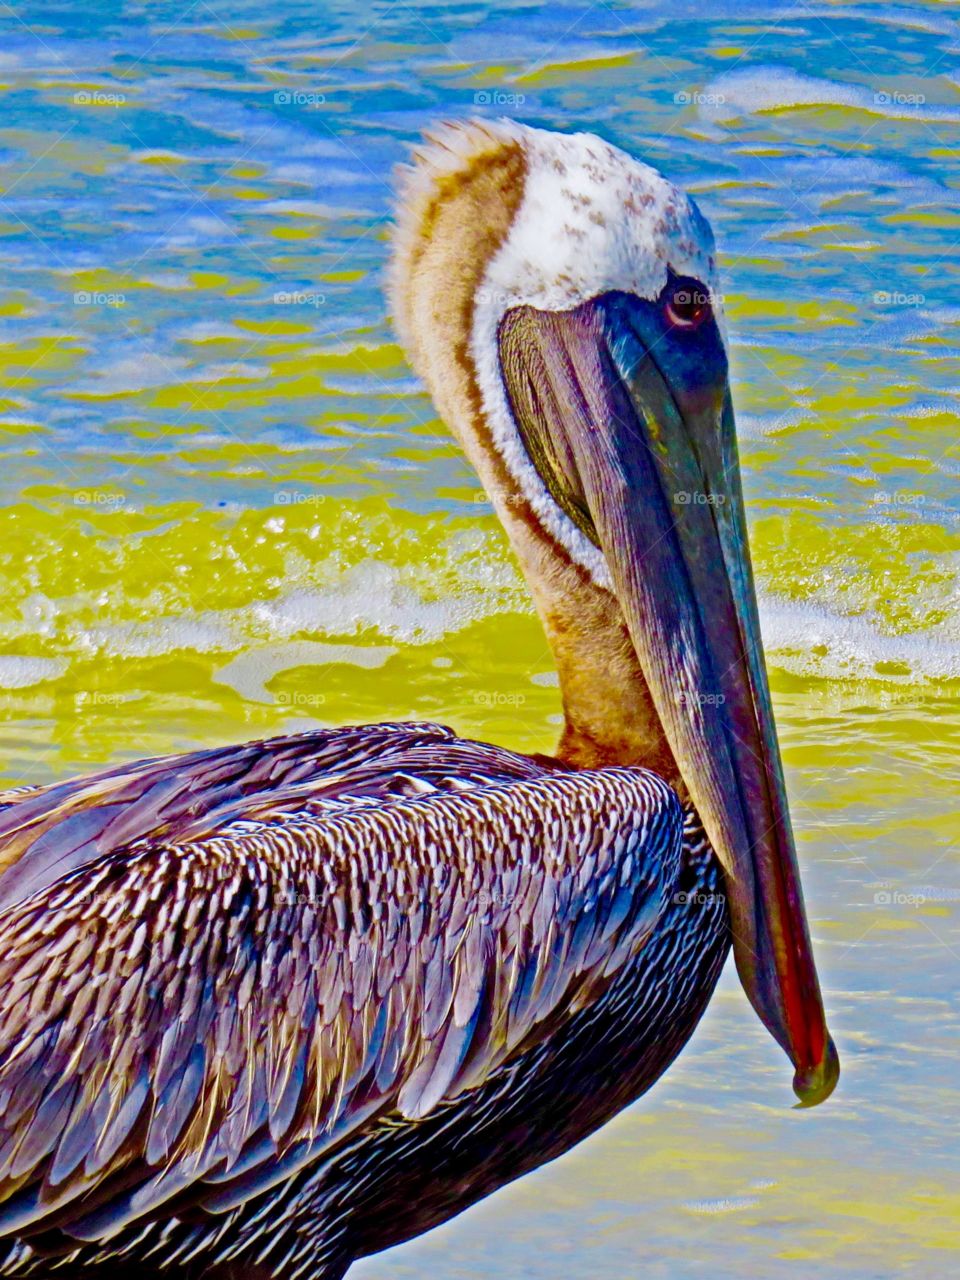 Colorful Pelican. Fort Myers Beach, FL